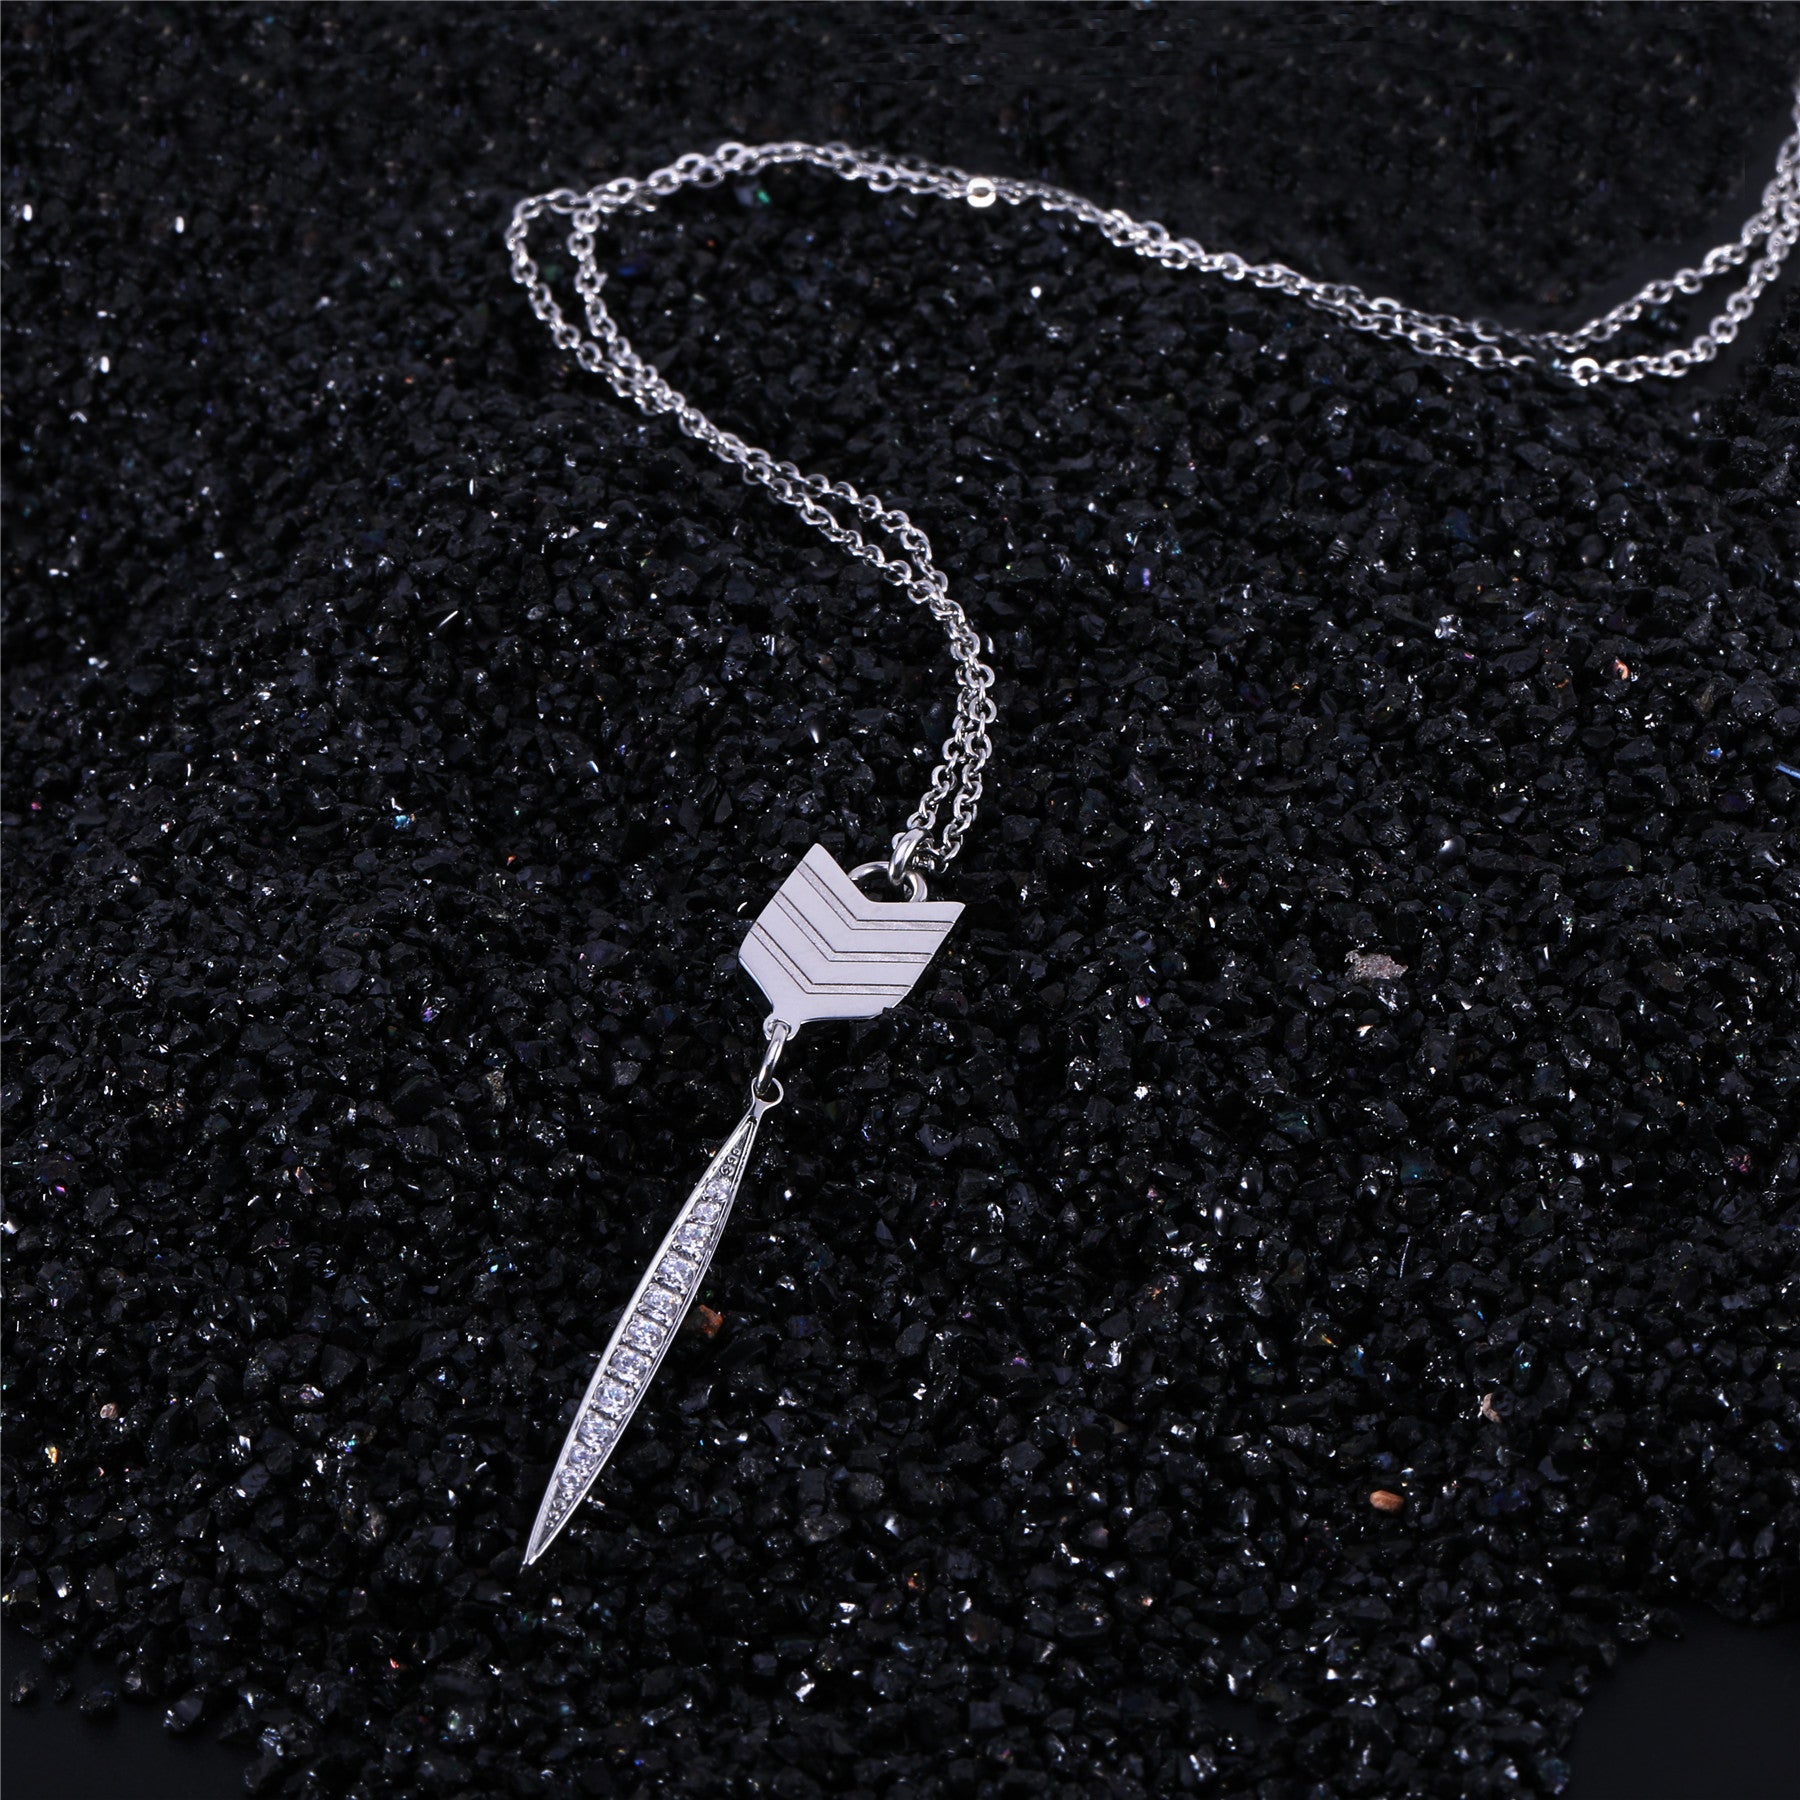 Addison 18k White Gold Plated Arrow Drop Dangle CZ Crystal Necklace